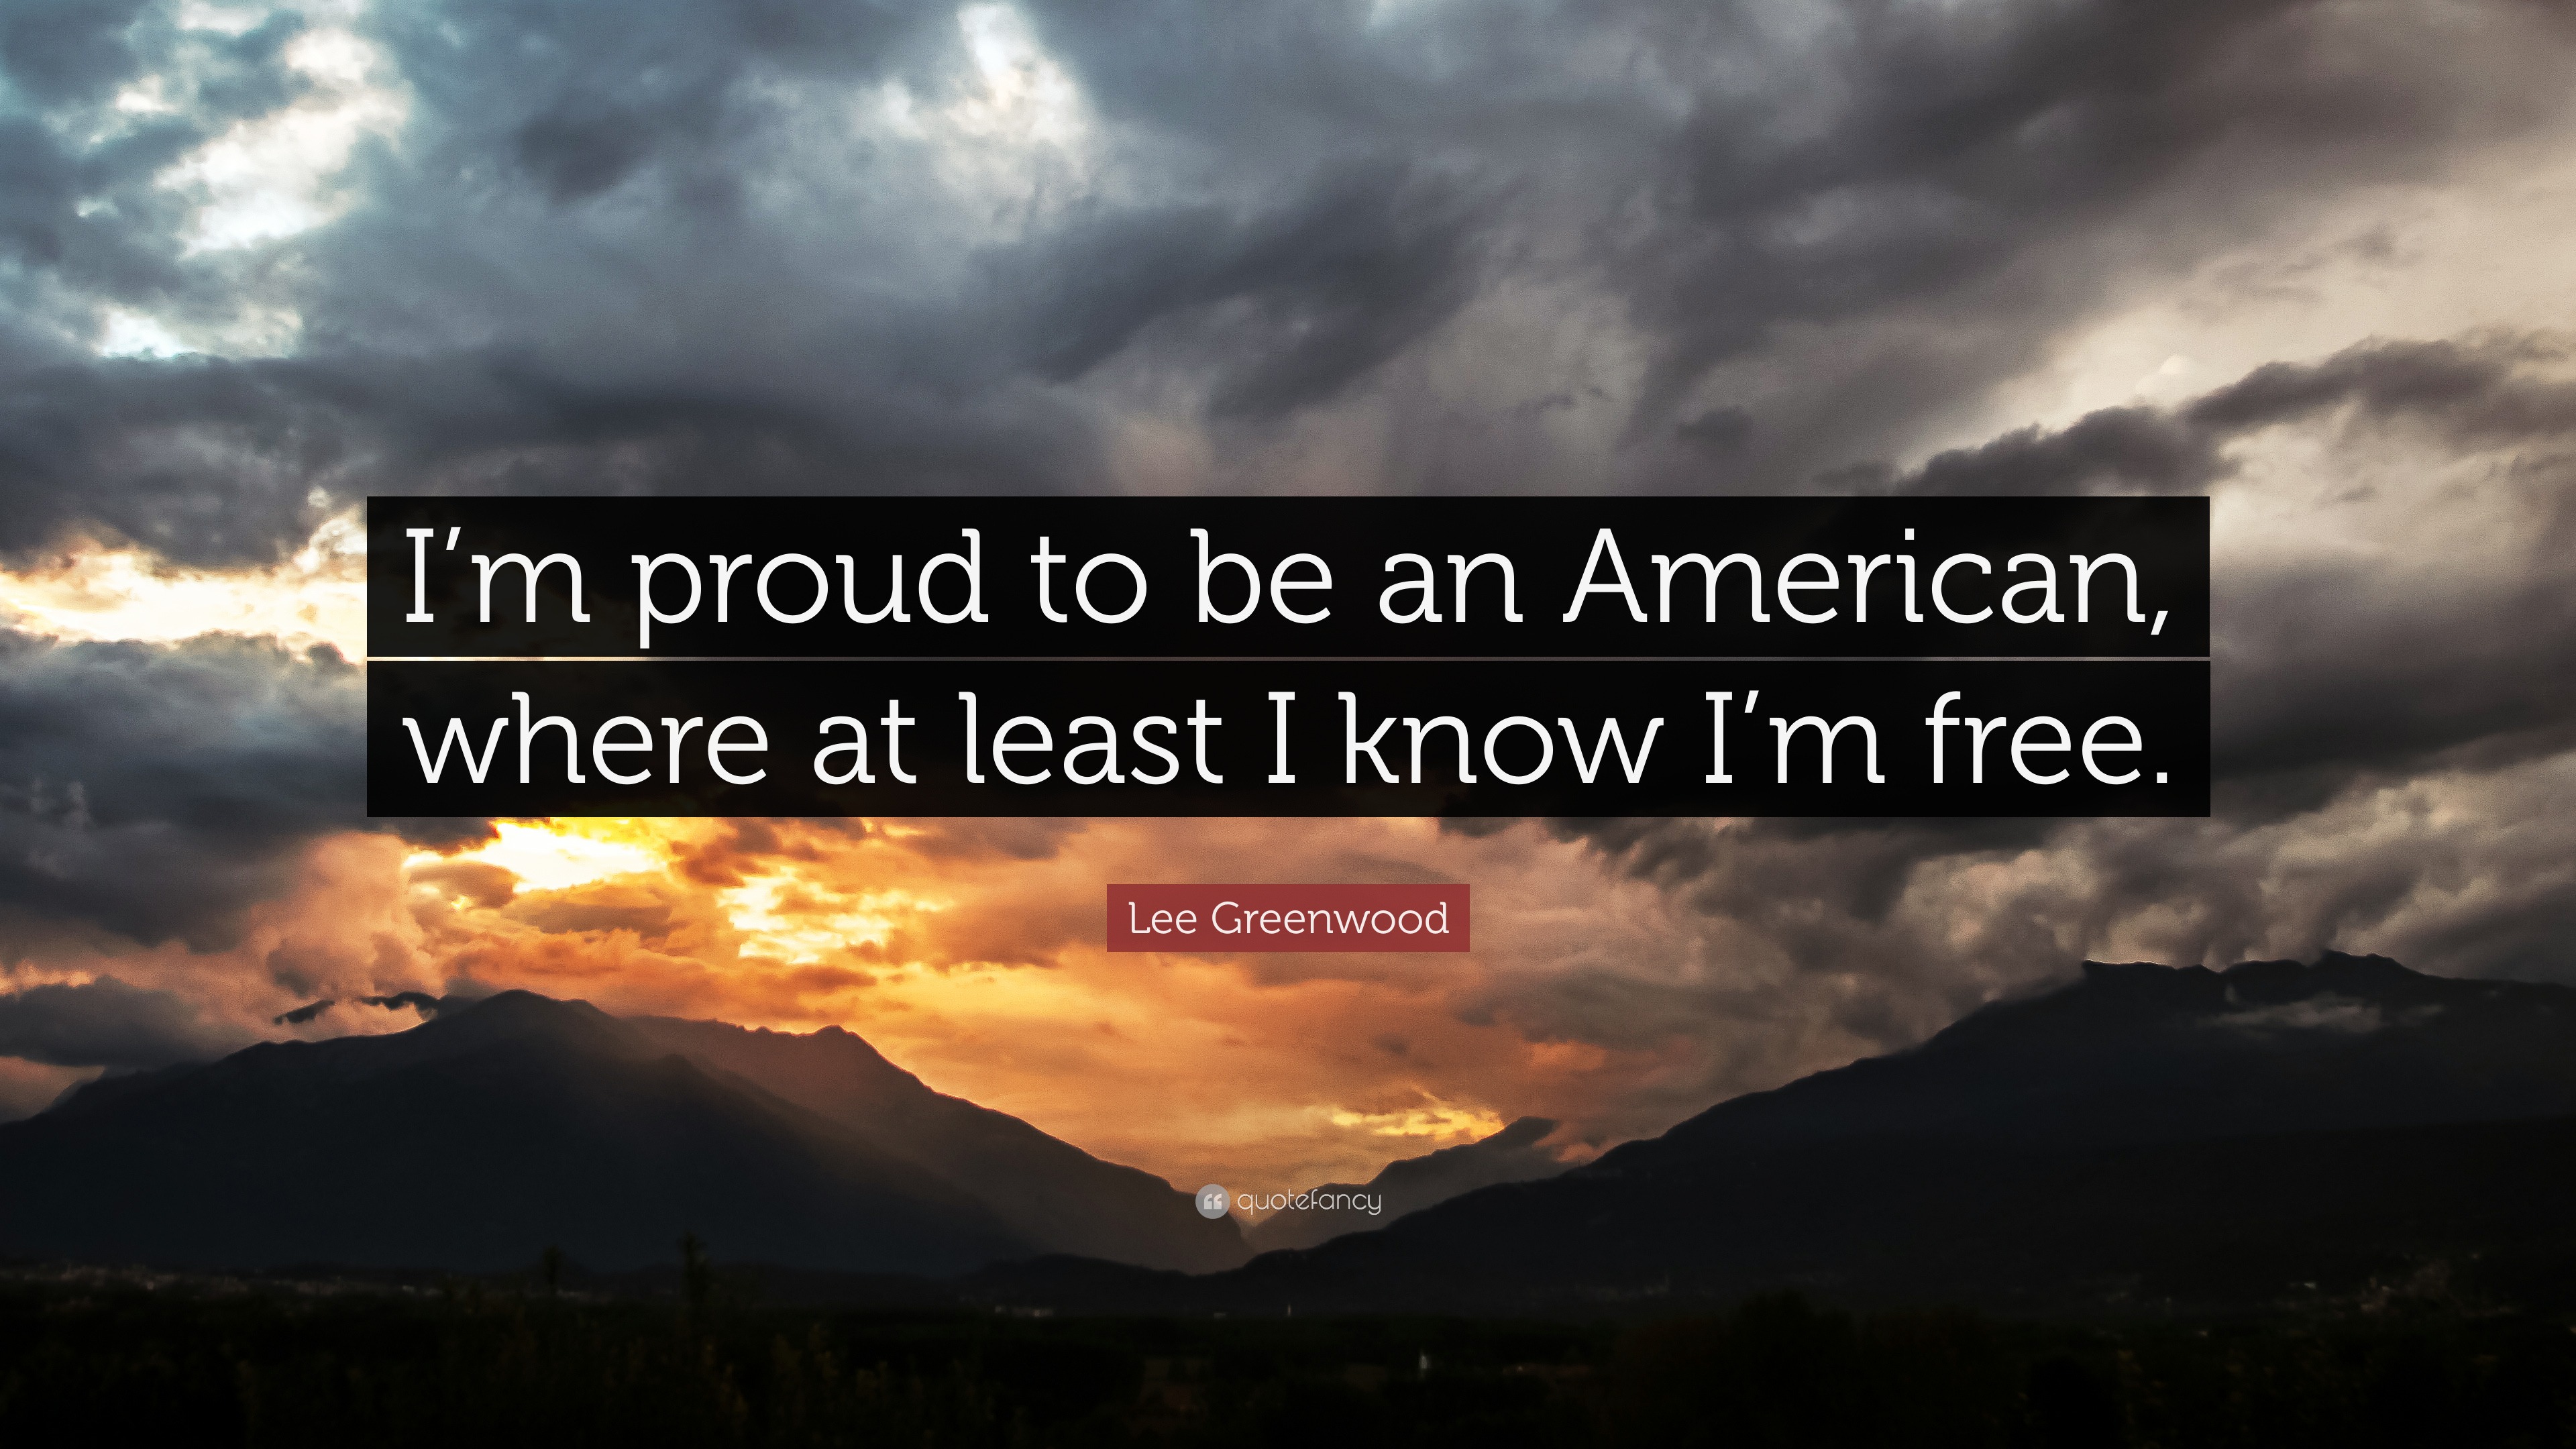 Lee Greenwood Quote: “I'm proud to be an American, where at least I know I'